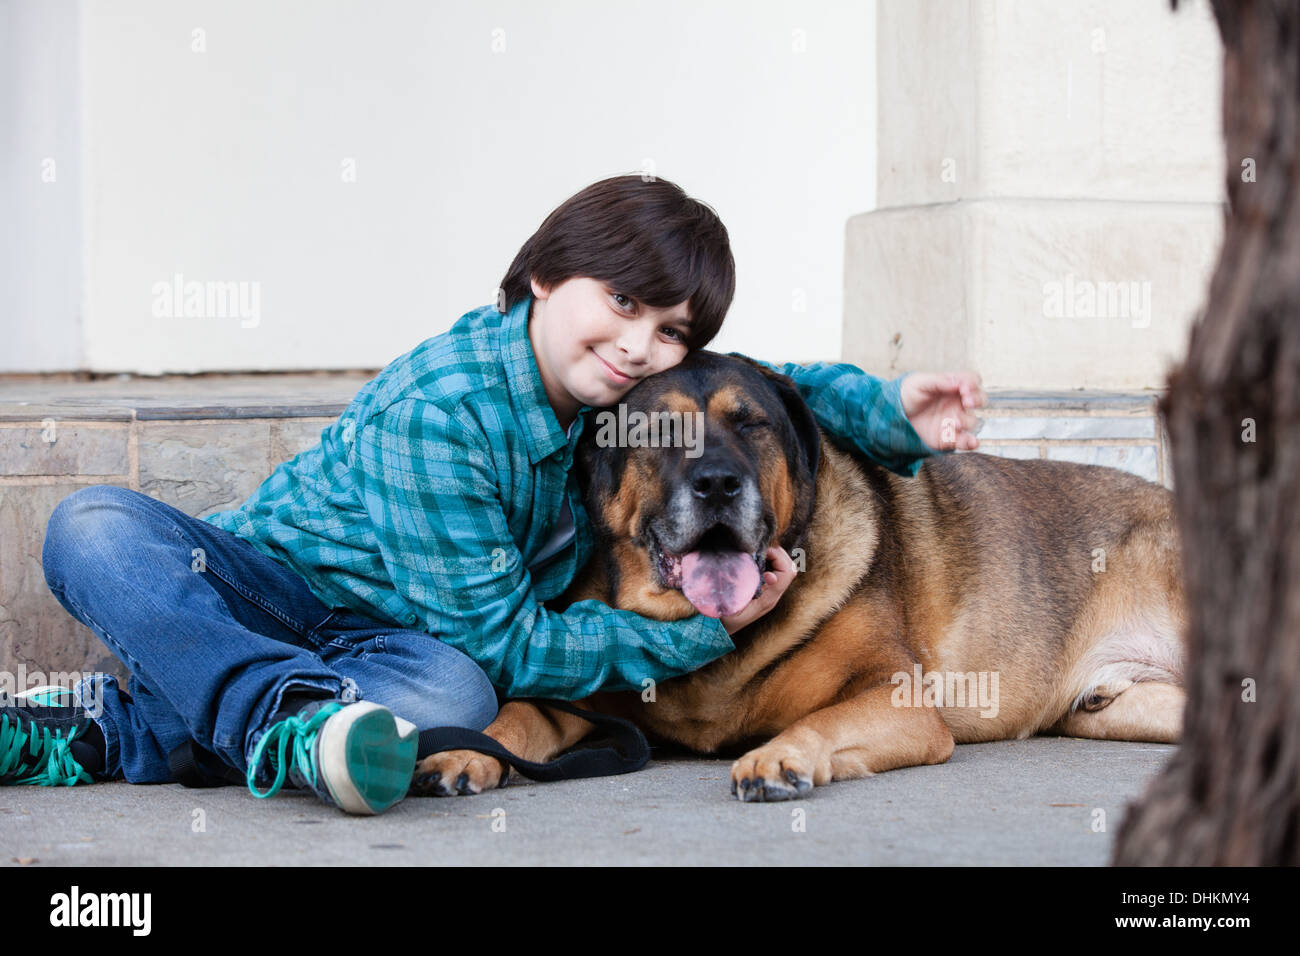 A 10 year old boy and his dog sitting down on the sidewalk Stock Photo